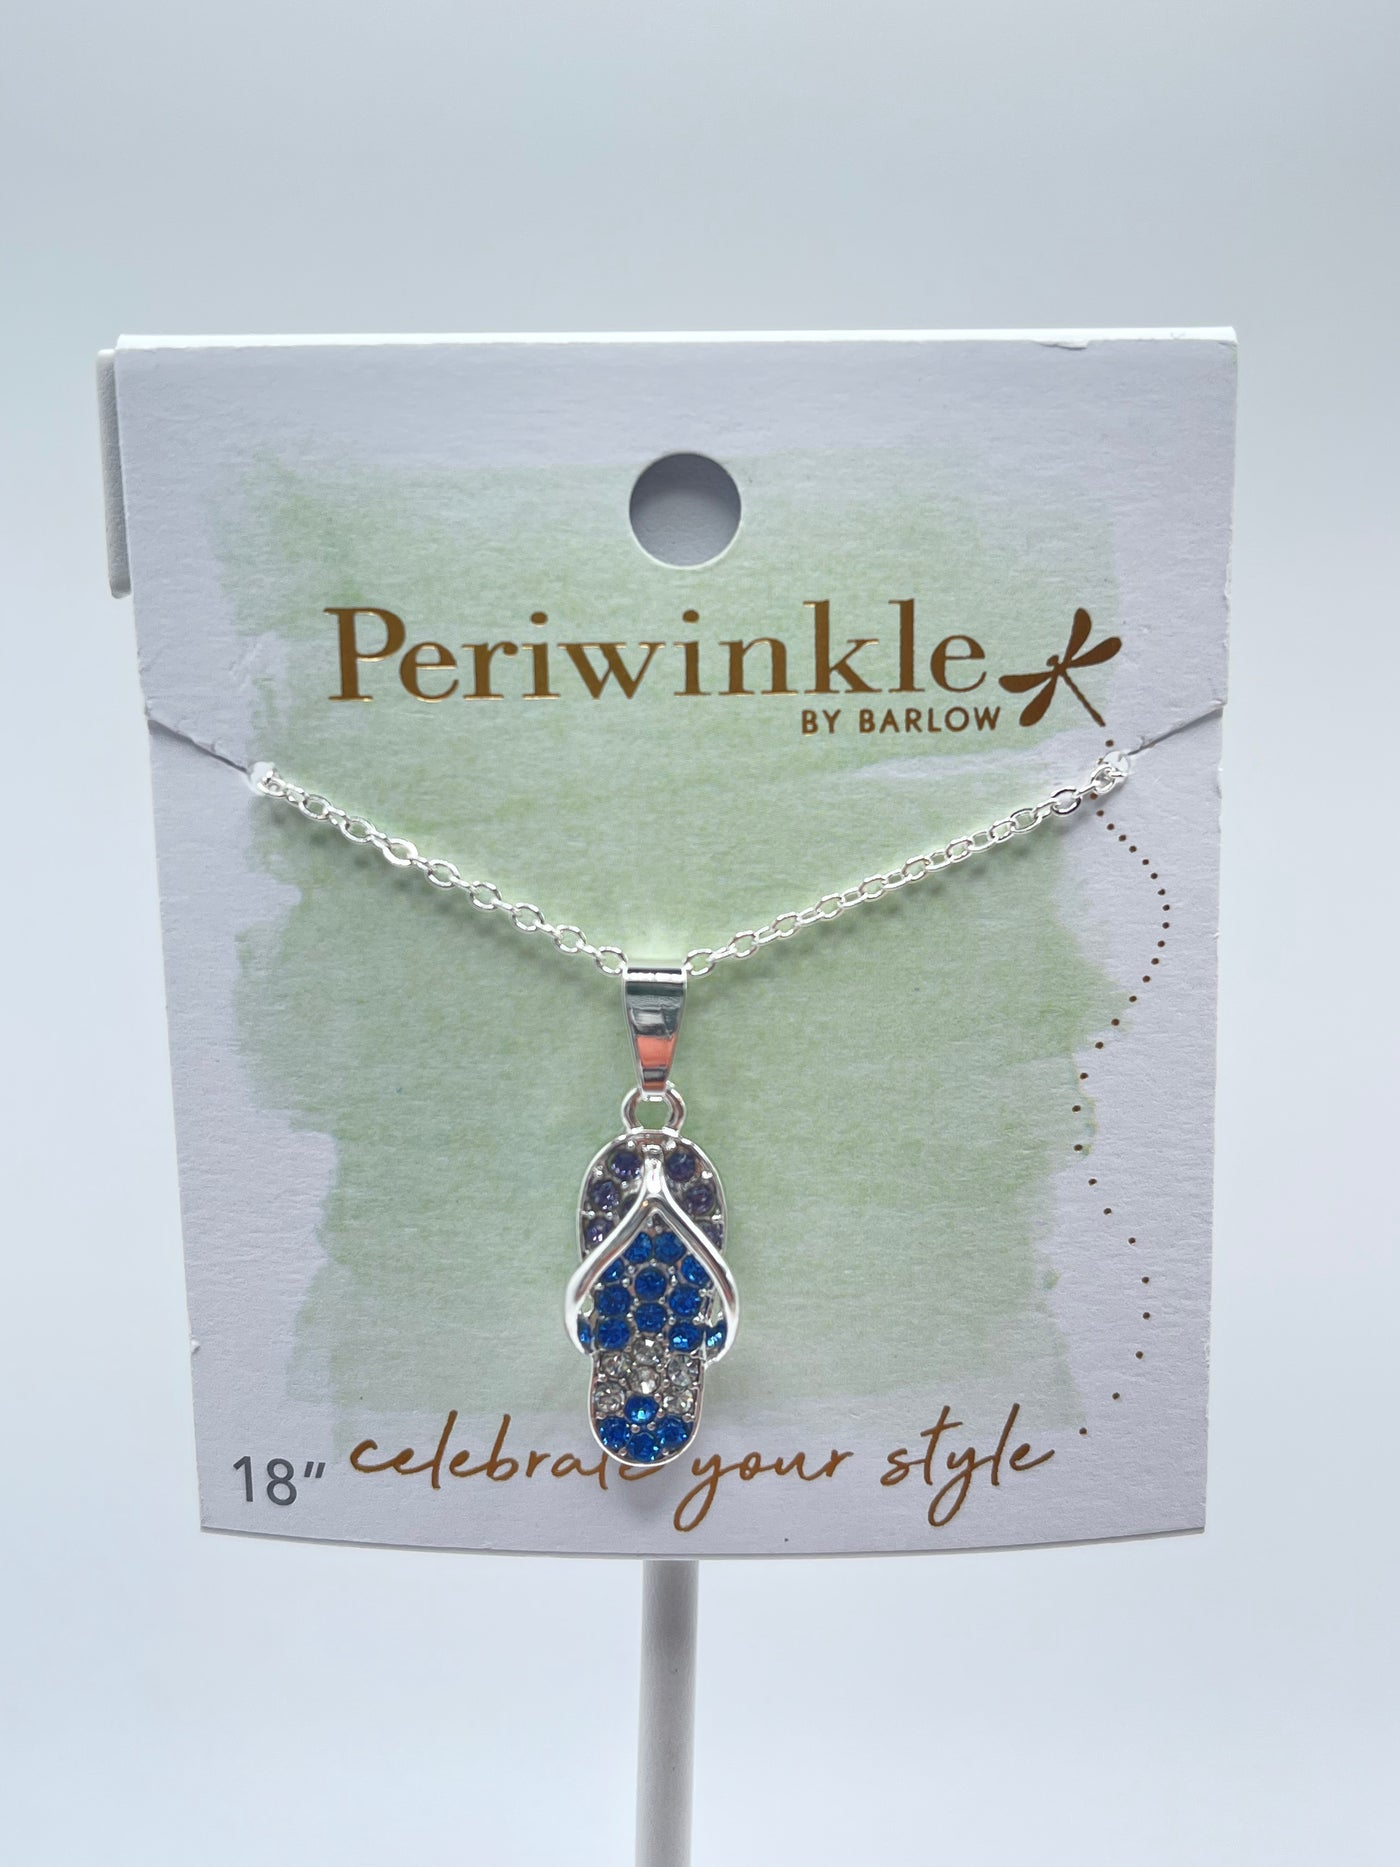 Necklaces by Periwinkle